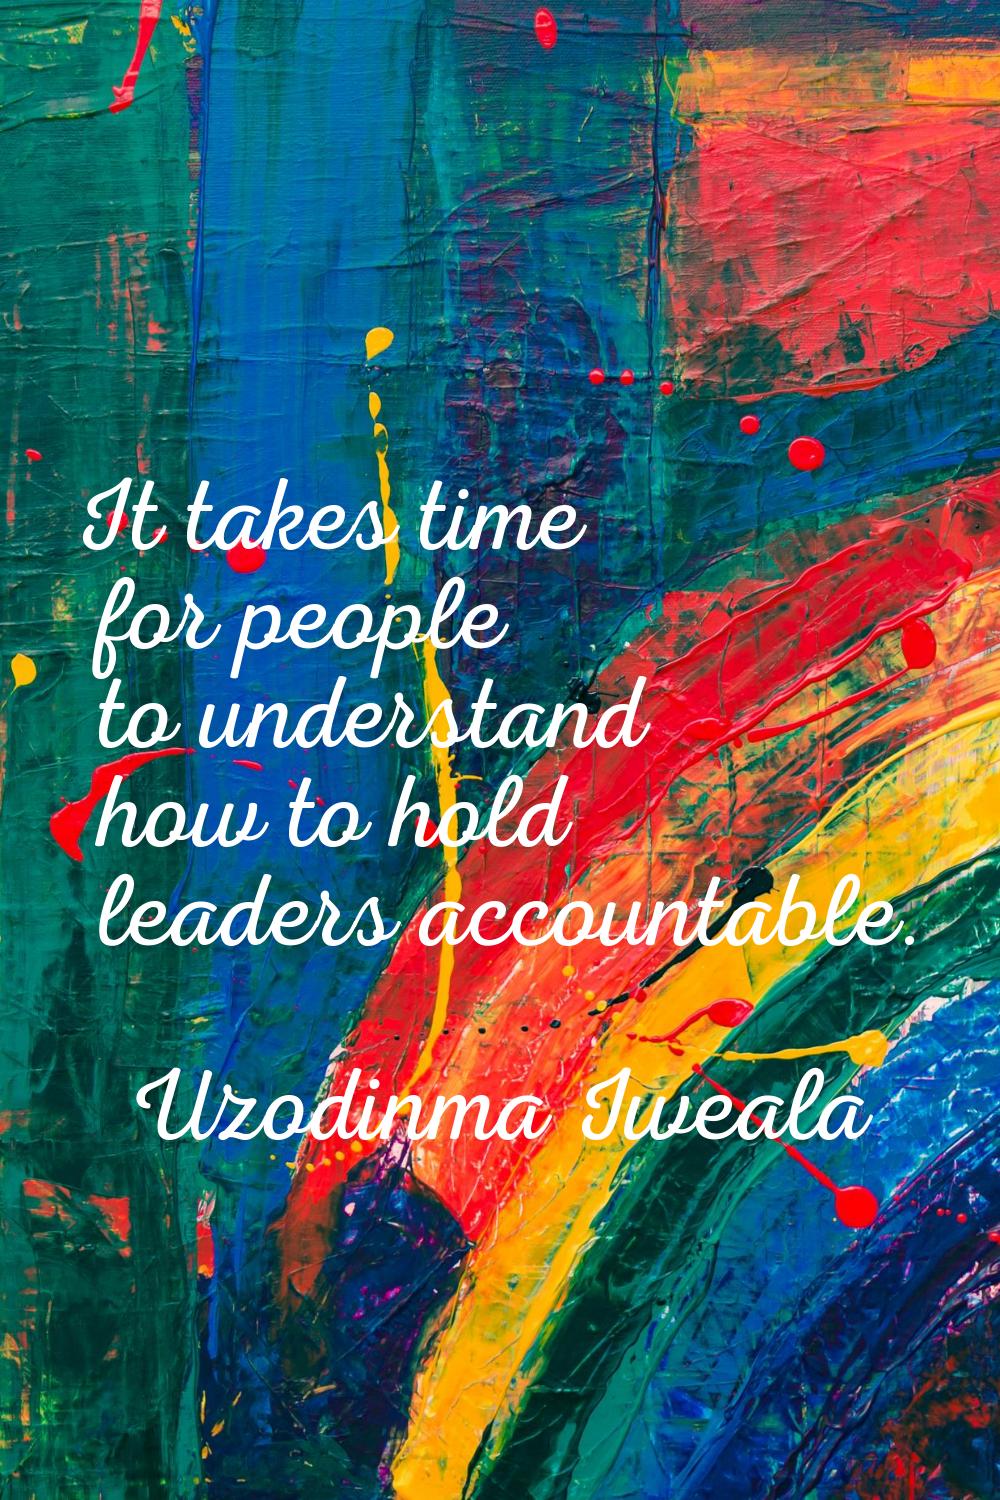 It takes time for people to understand how to hold leaders accountable.